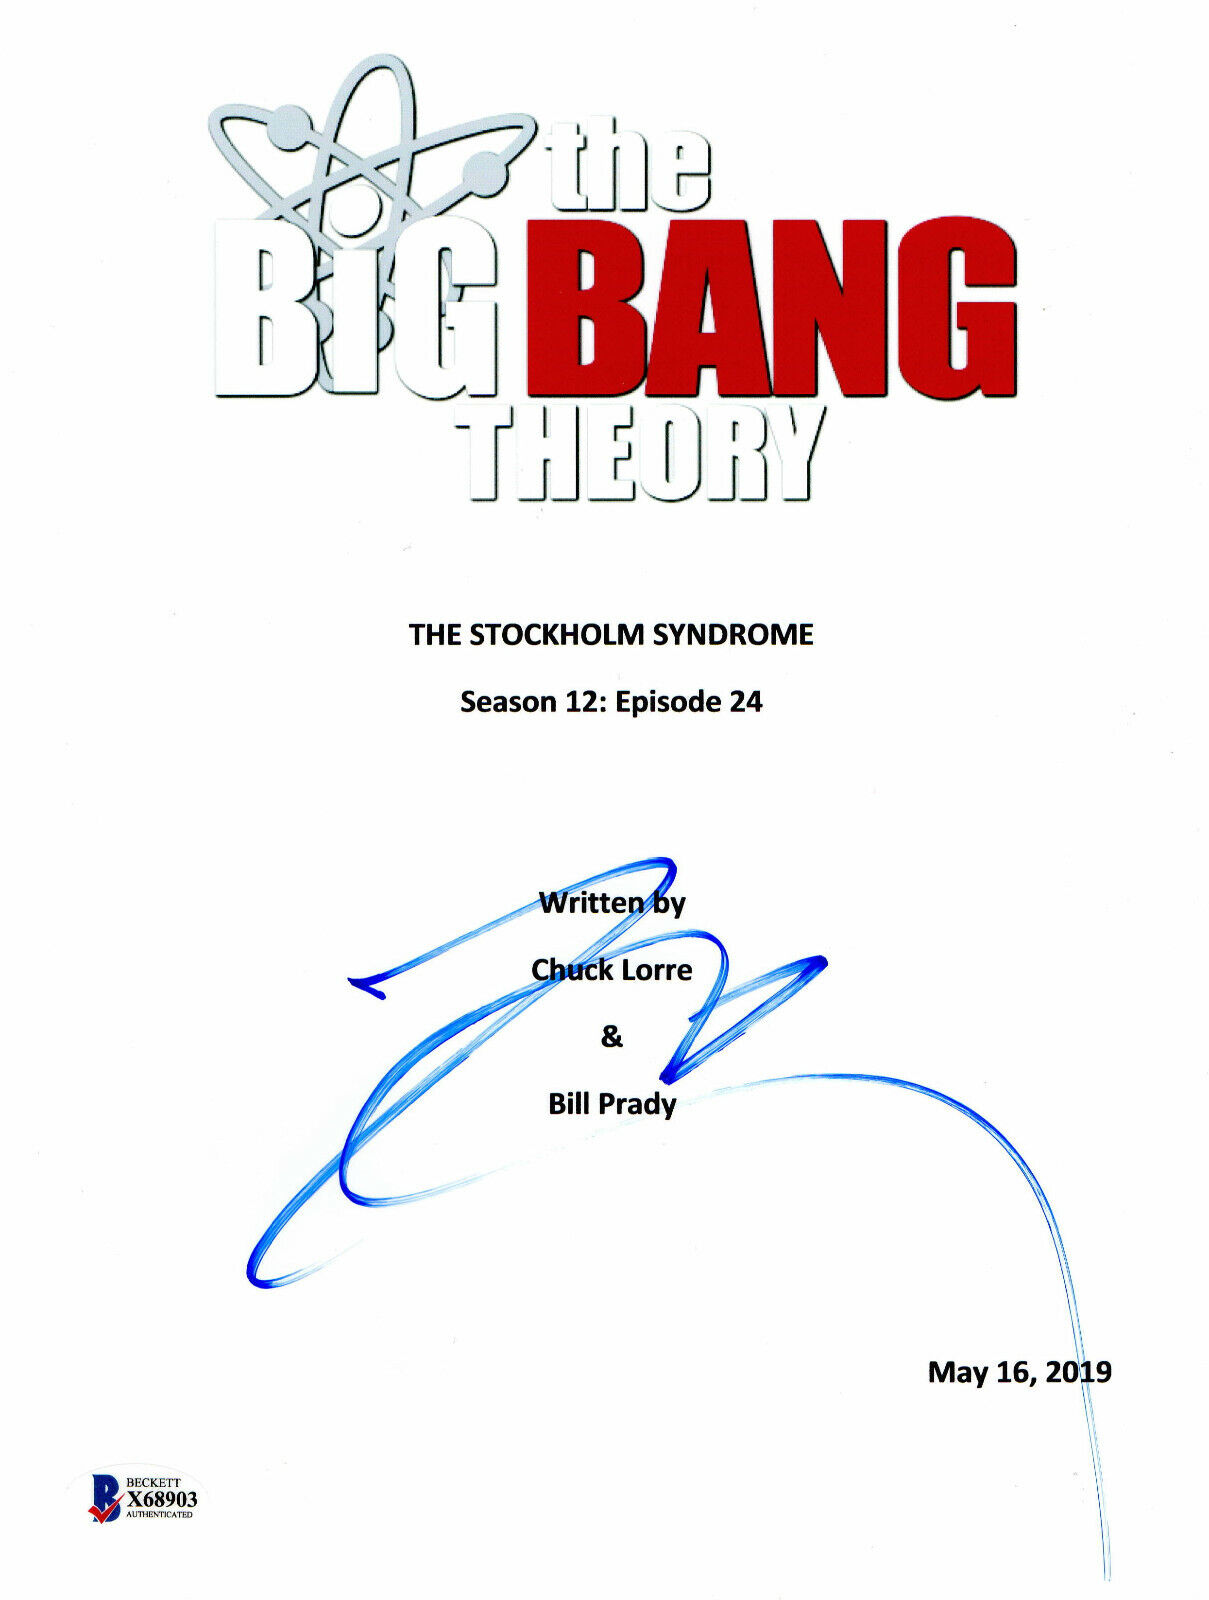 JOHNNY GALECKI SIGNED AUTOGRAPH THE BIG BANG THEORY FINALE SCRIPT BECKETT BAS 